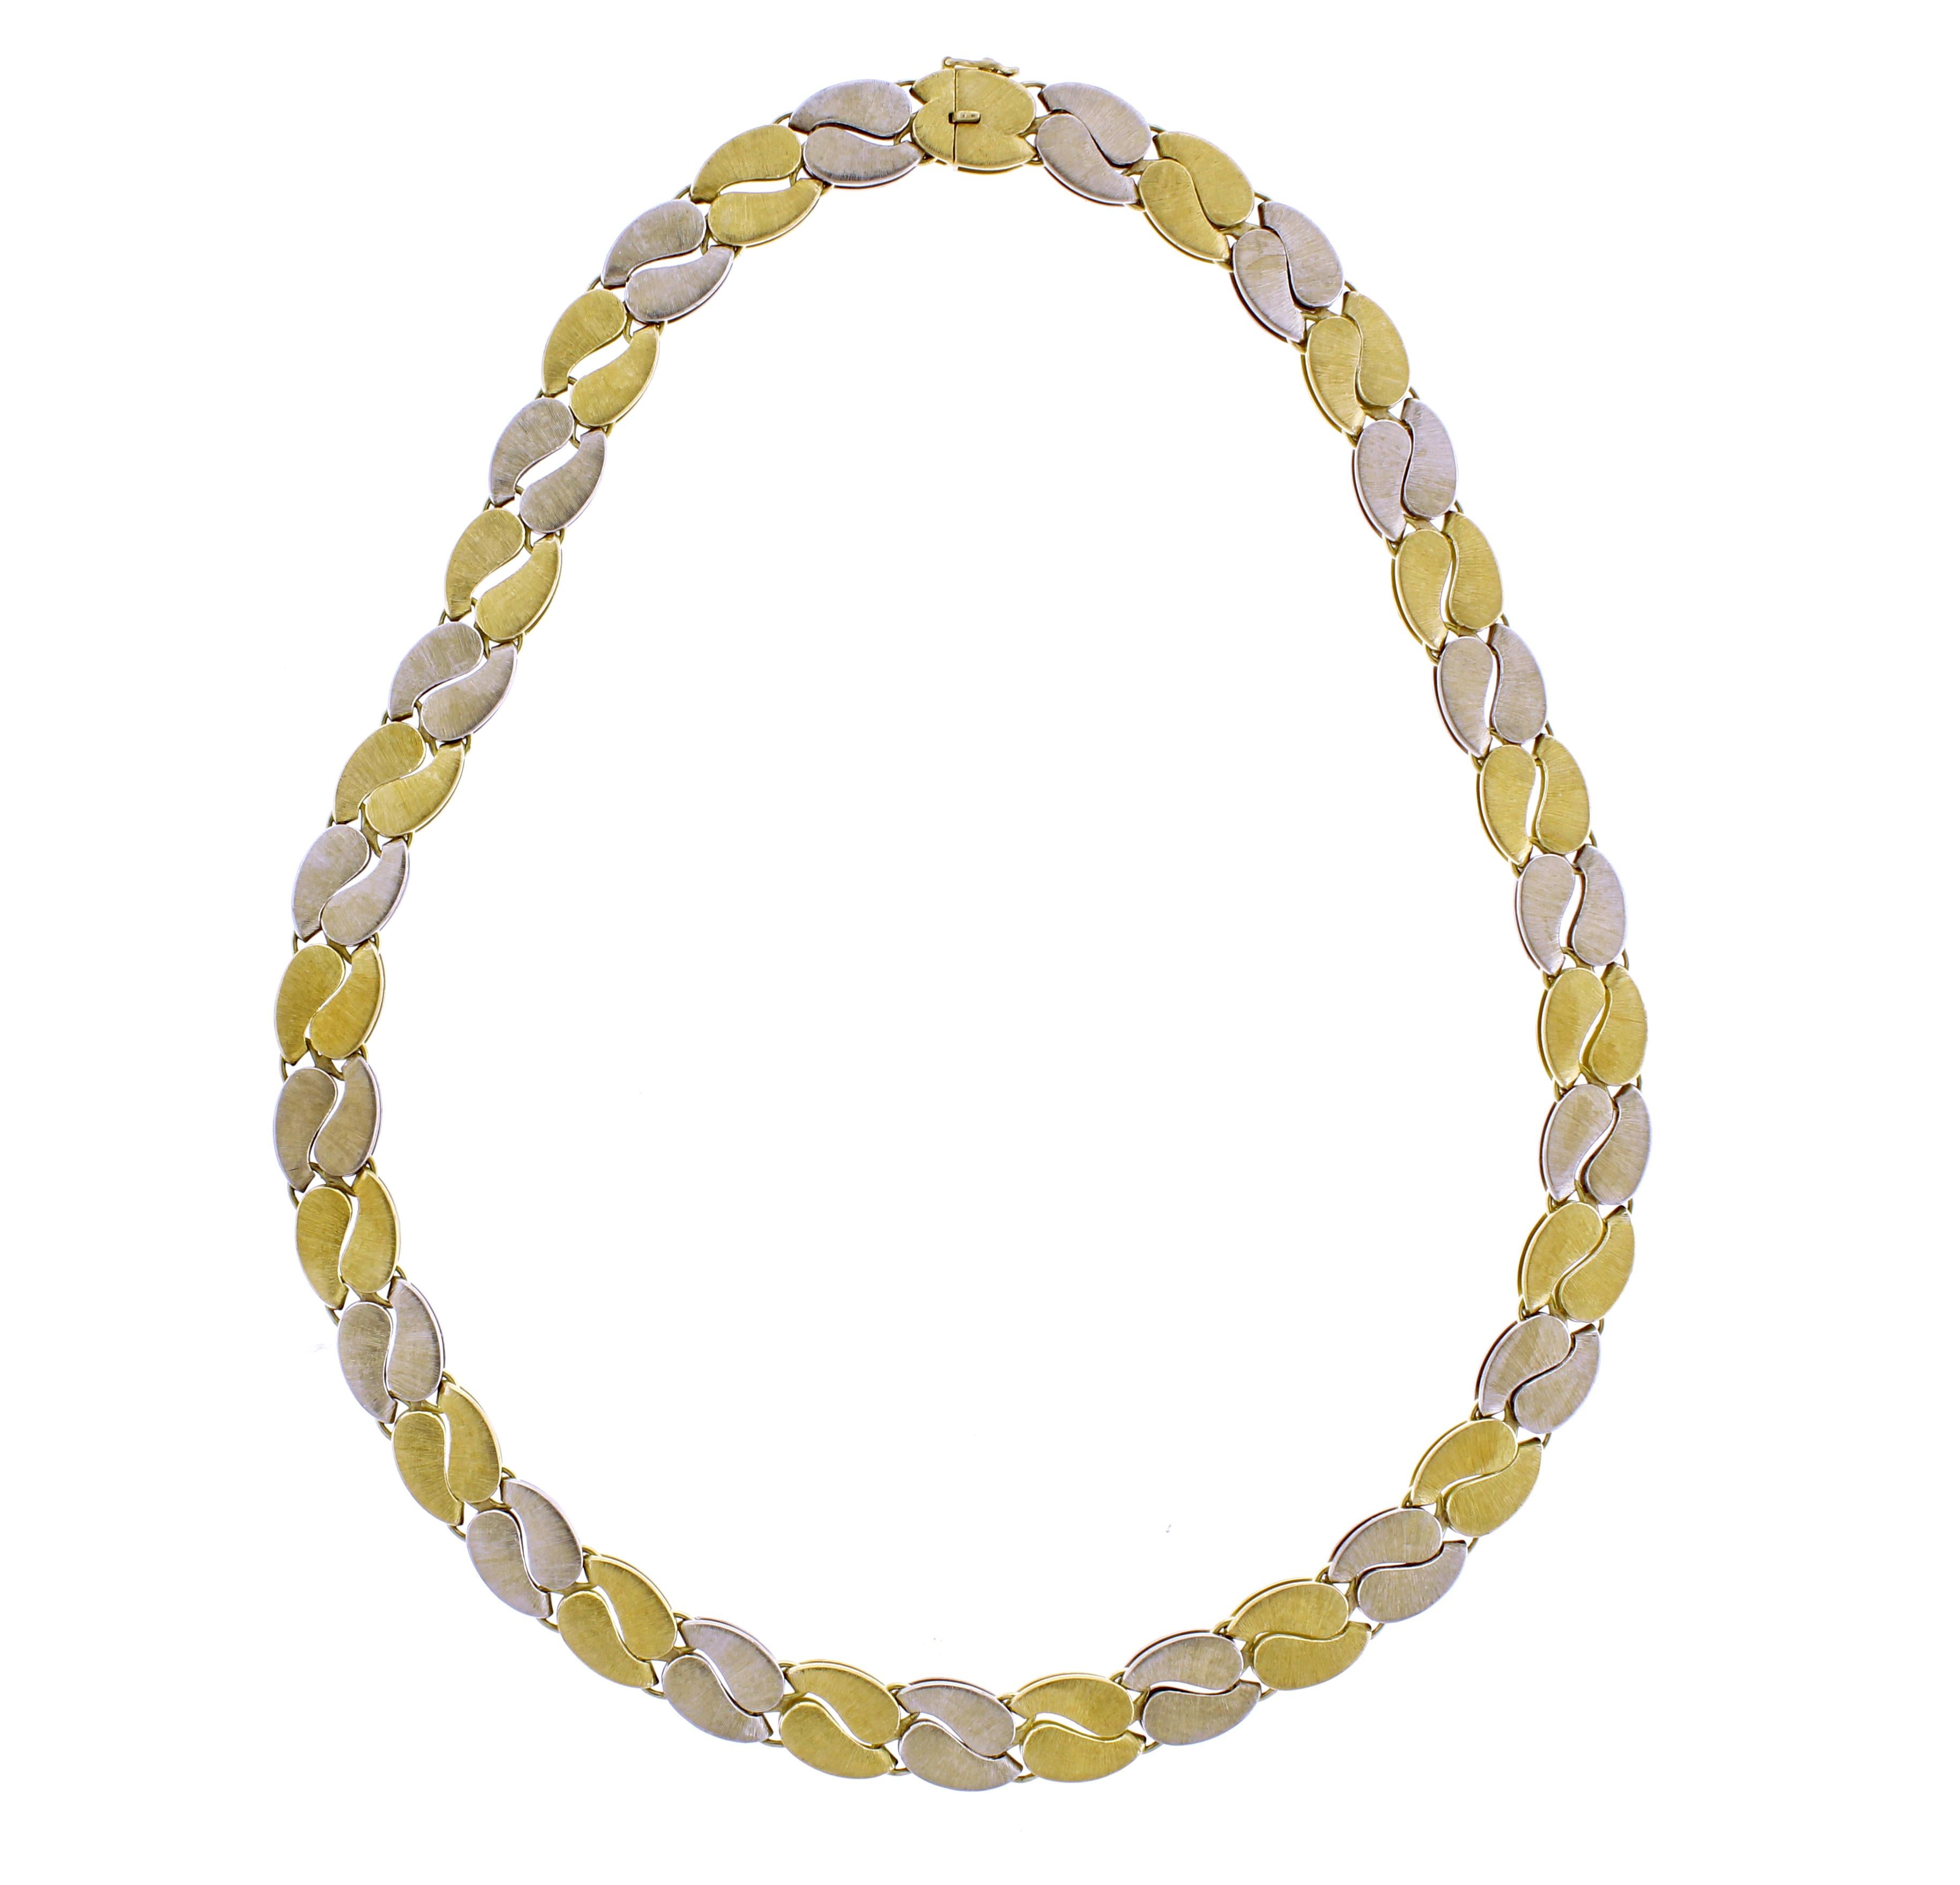 M. Buccellati Two-Tone Reversible Polished and Textured Gold Necklace